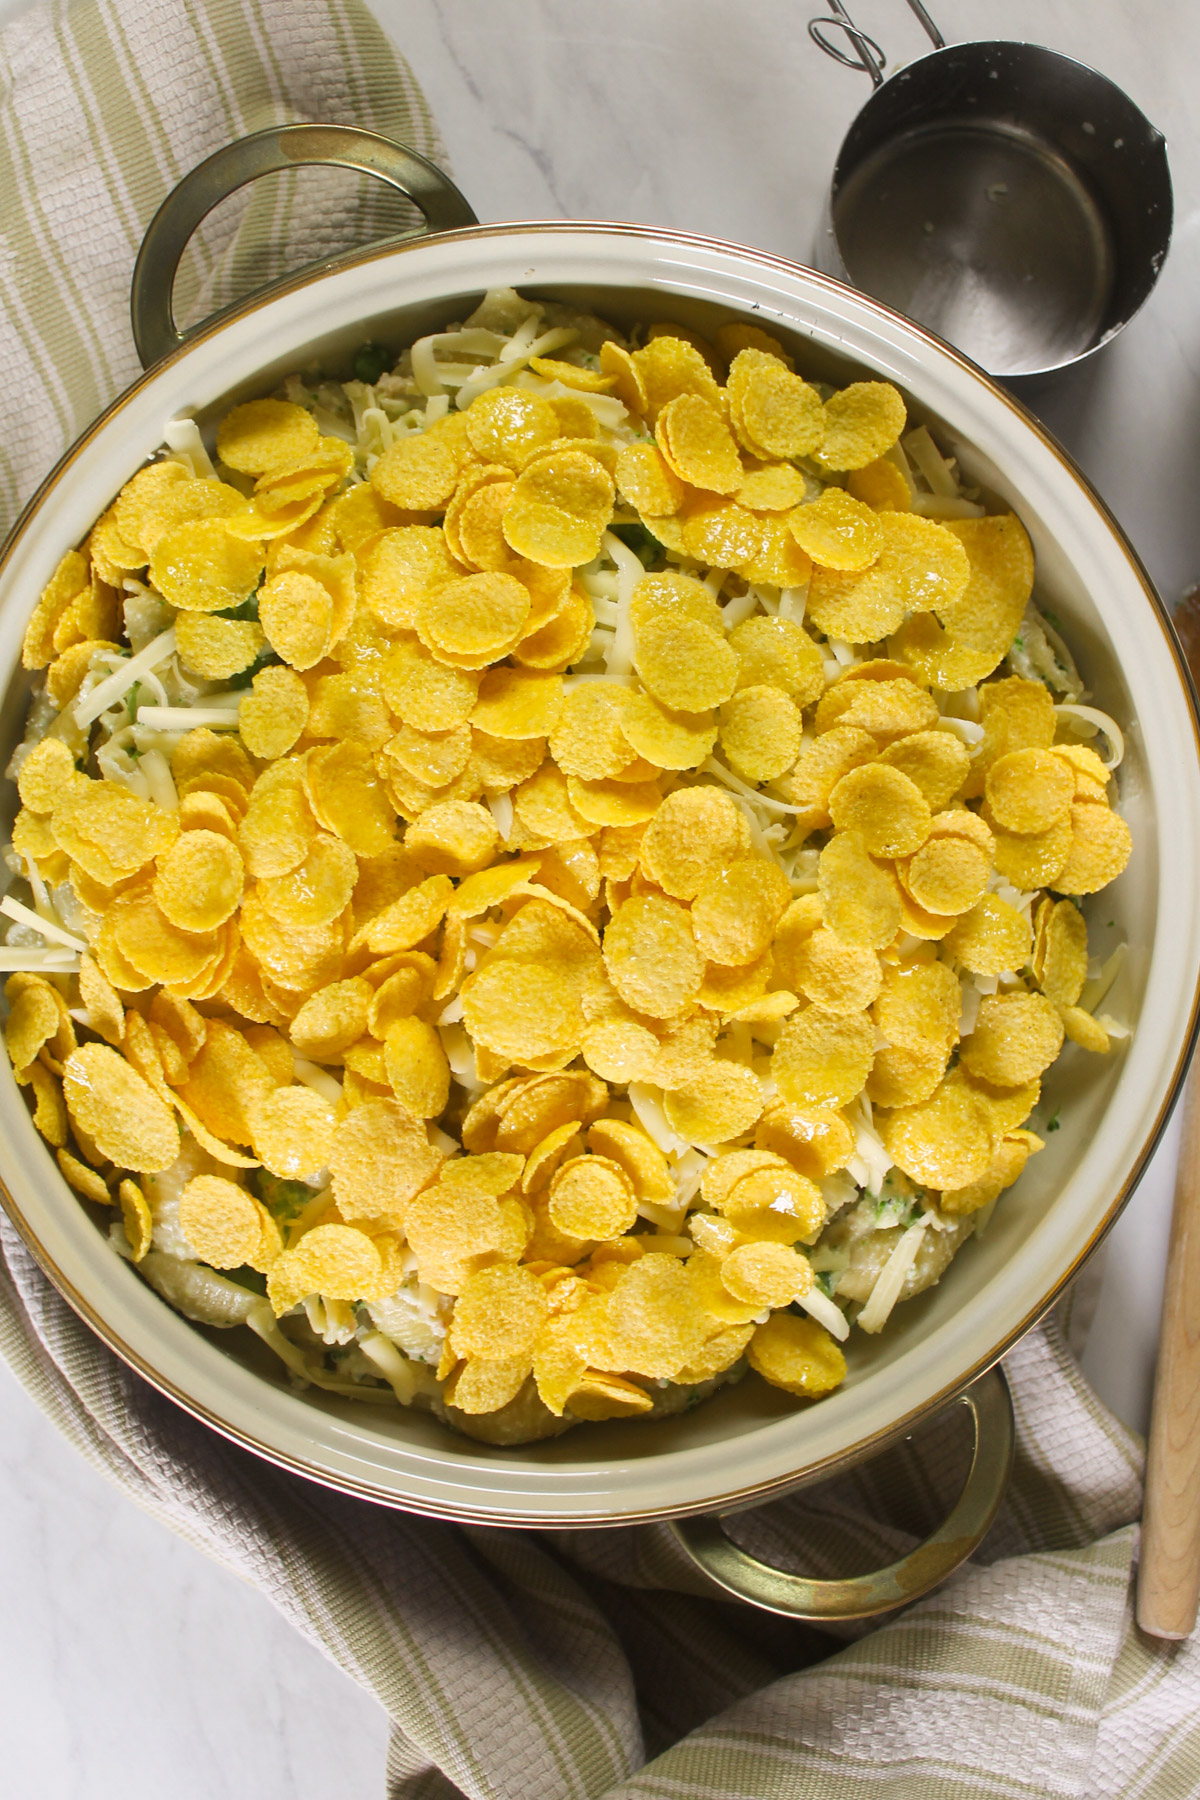 Tuna Broccoli Pasta Bake topped with cheese and buttered cornflakes, ready to bake.